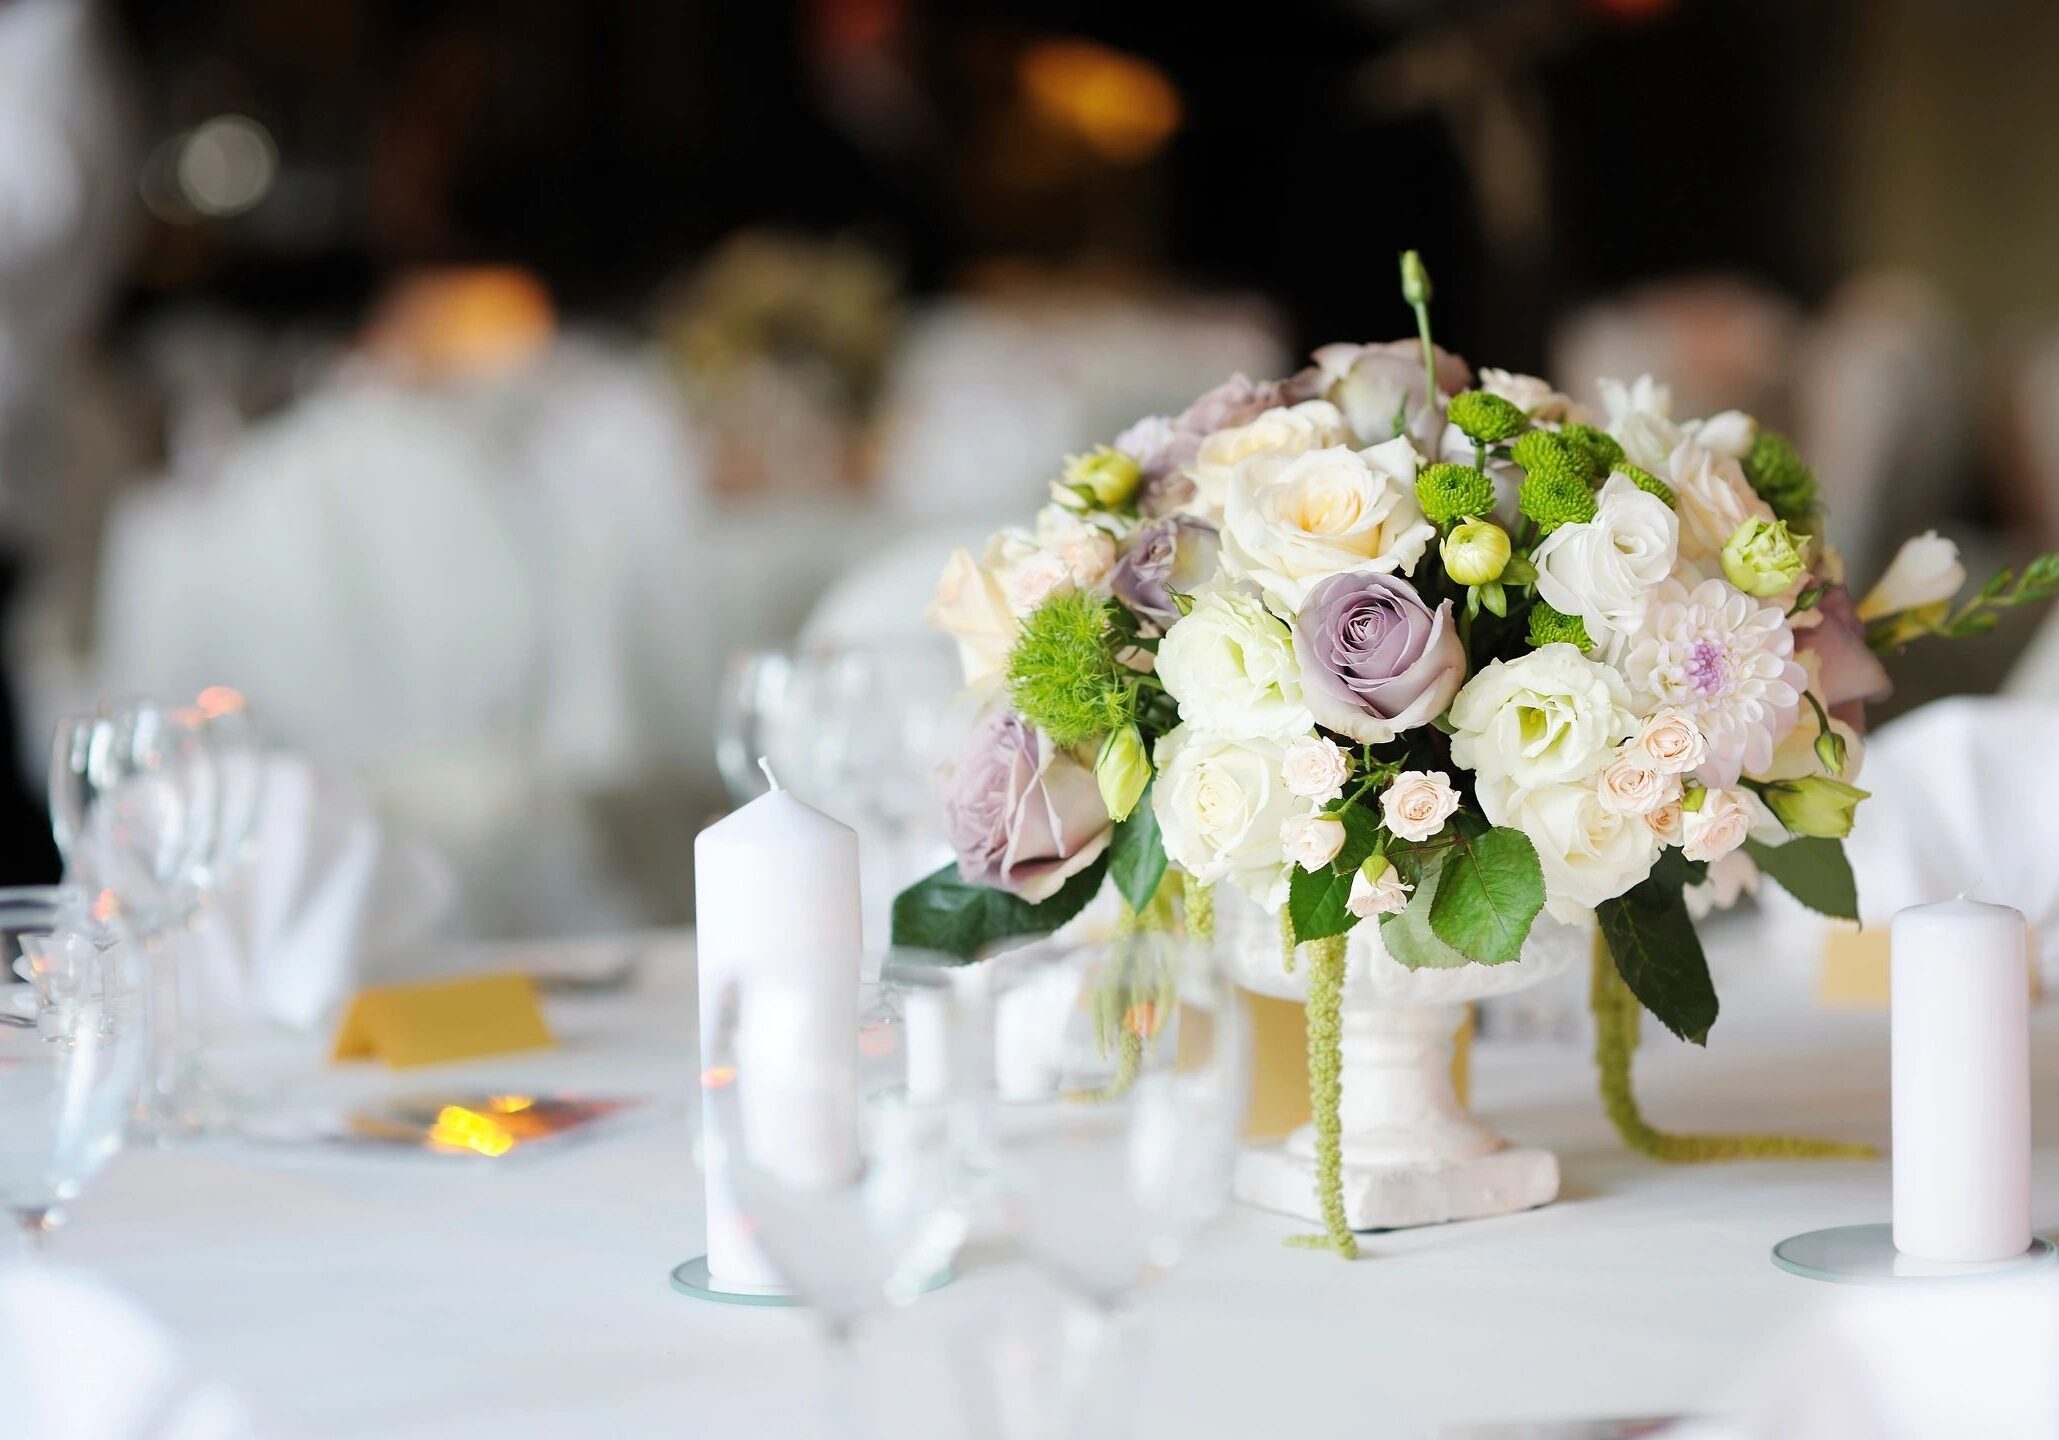 Tableland Party Hire - Bunch of flowers on a table